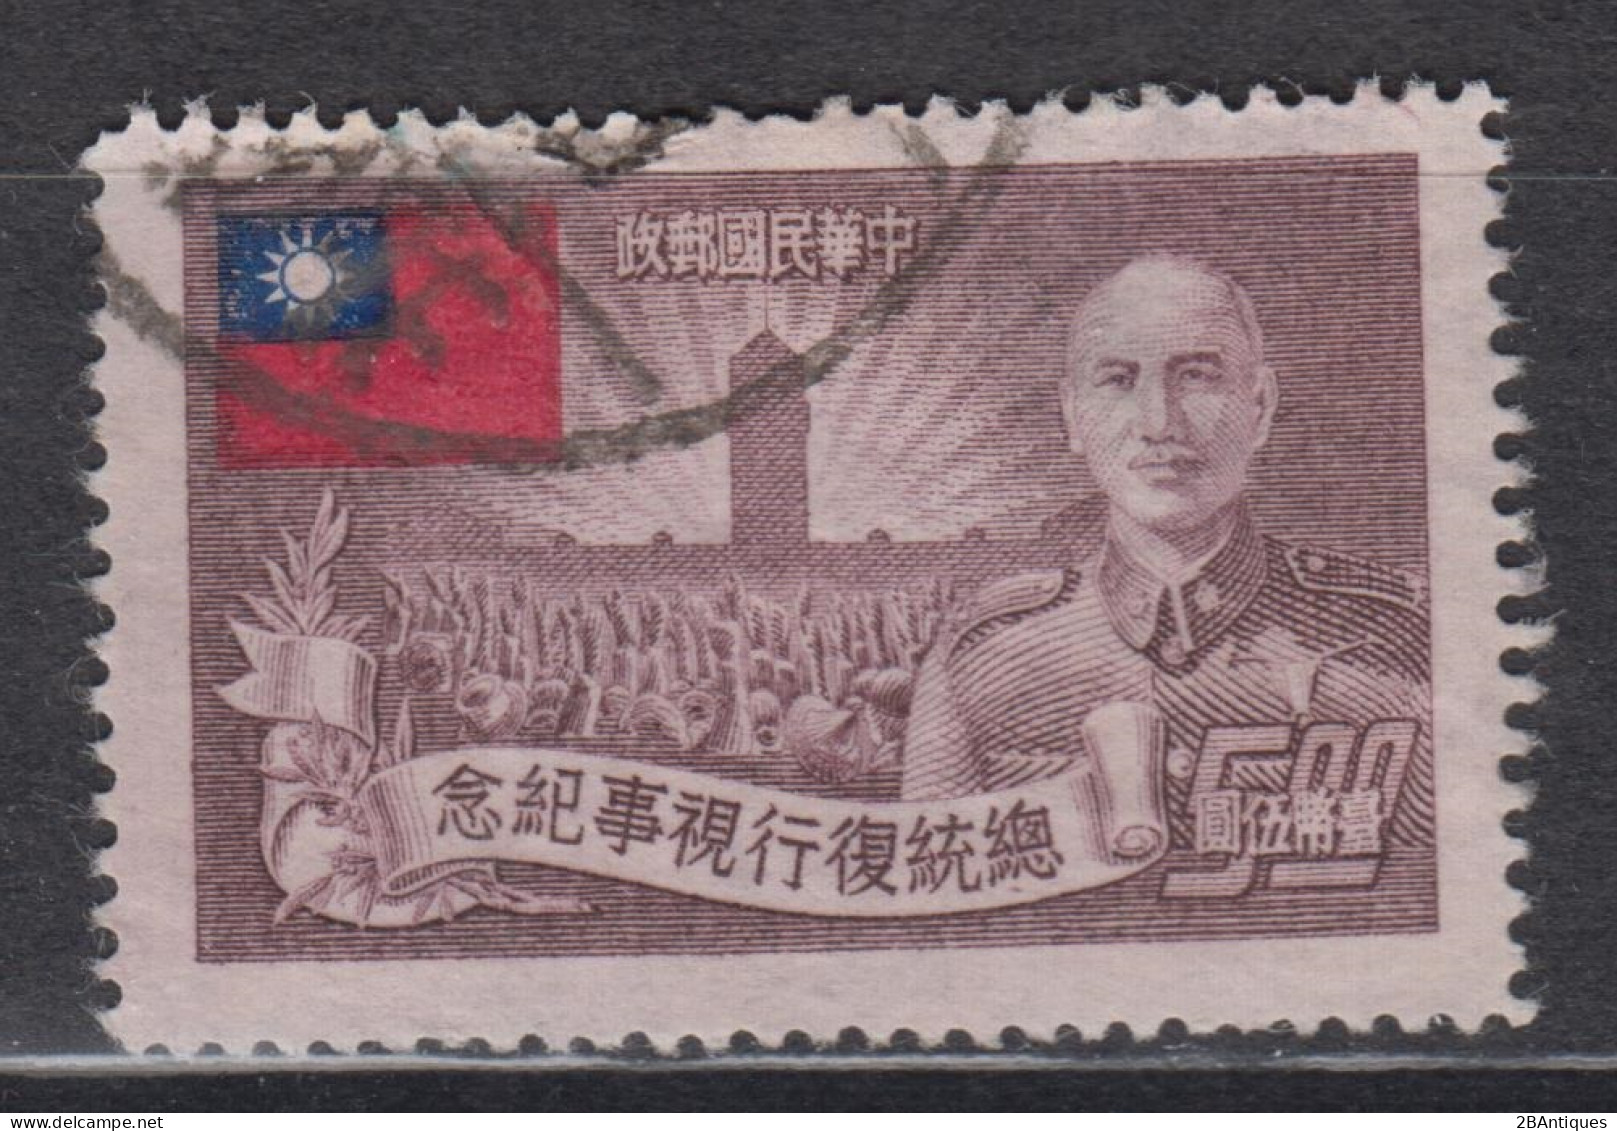 TAIWAN 1953 - The 3rd Anniversary Of Re-election Of President Chiang Kai-shek KEY VALUE! - Usati